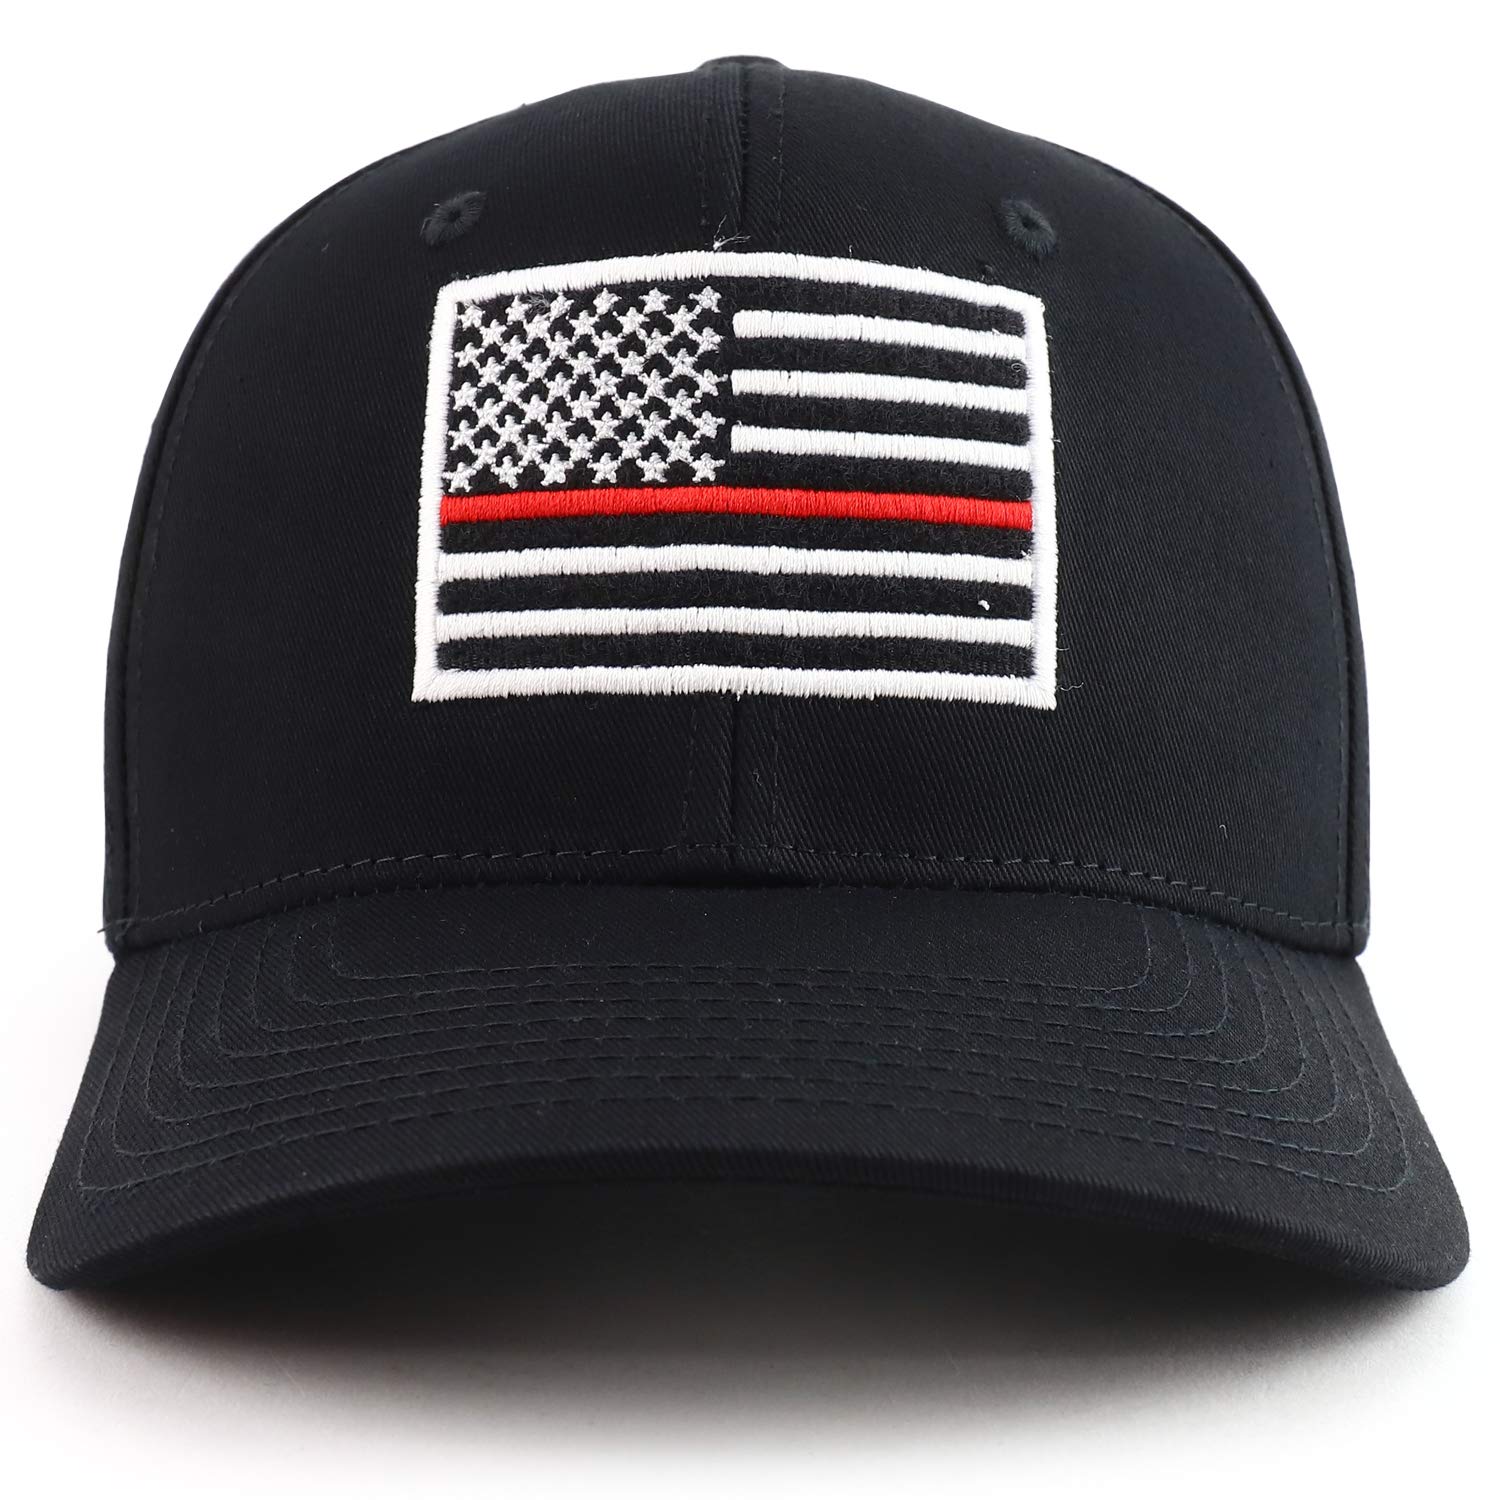 USA American Flag Embroidered 6 Panel Adjustable Operator Cap - Thin Red Line